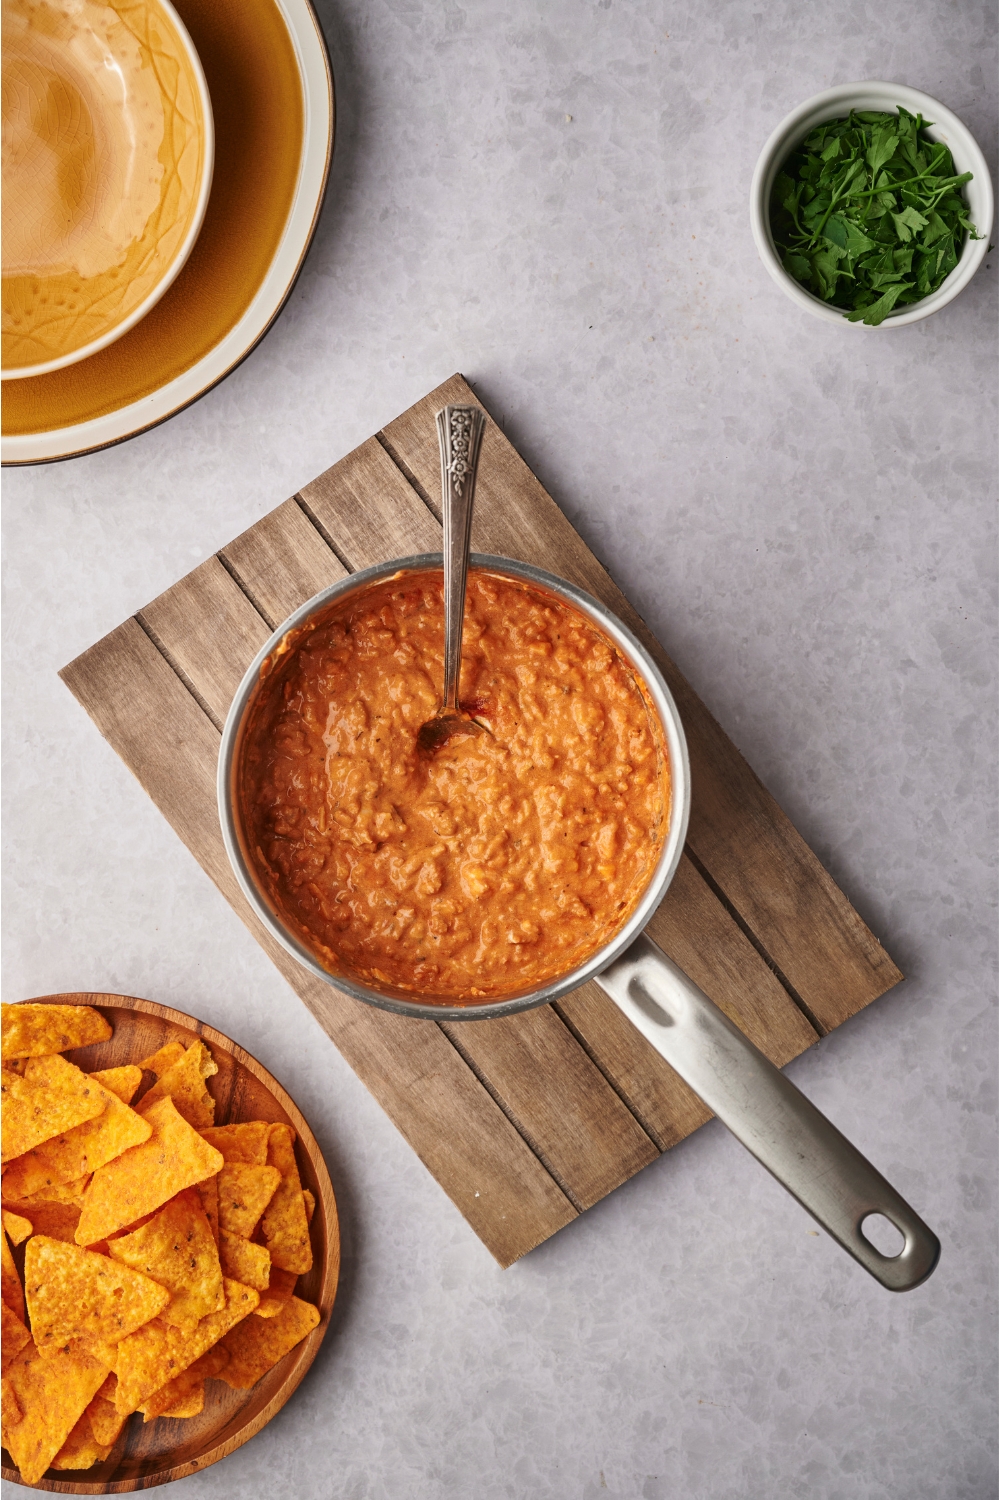 A sauce pan filled with chili cheese dip on top of a wooden board. There is a spoon in the pot and the pot is next to a bowl of fresh herbs and a plate of tortilla chips.